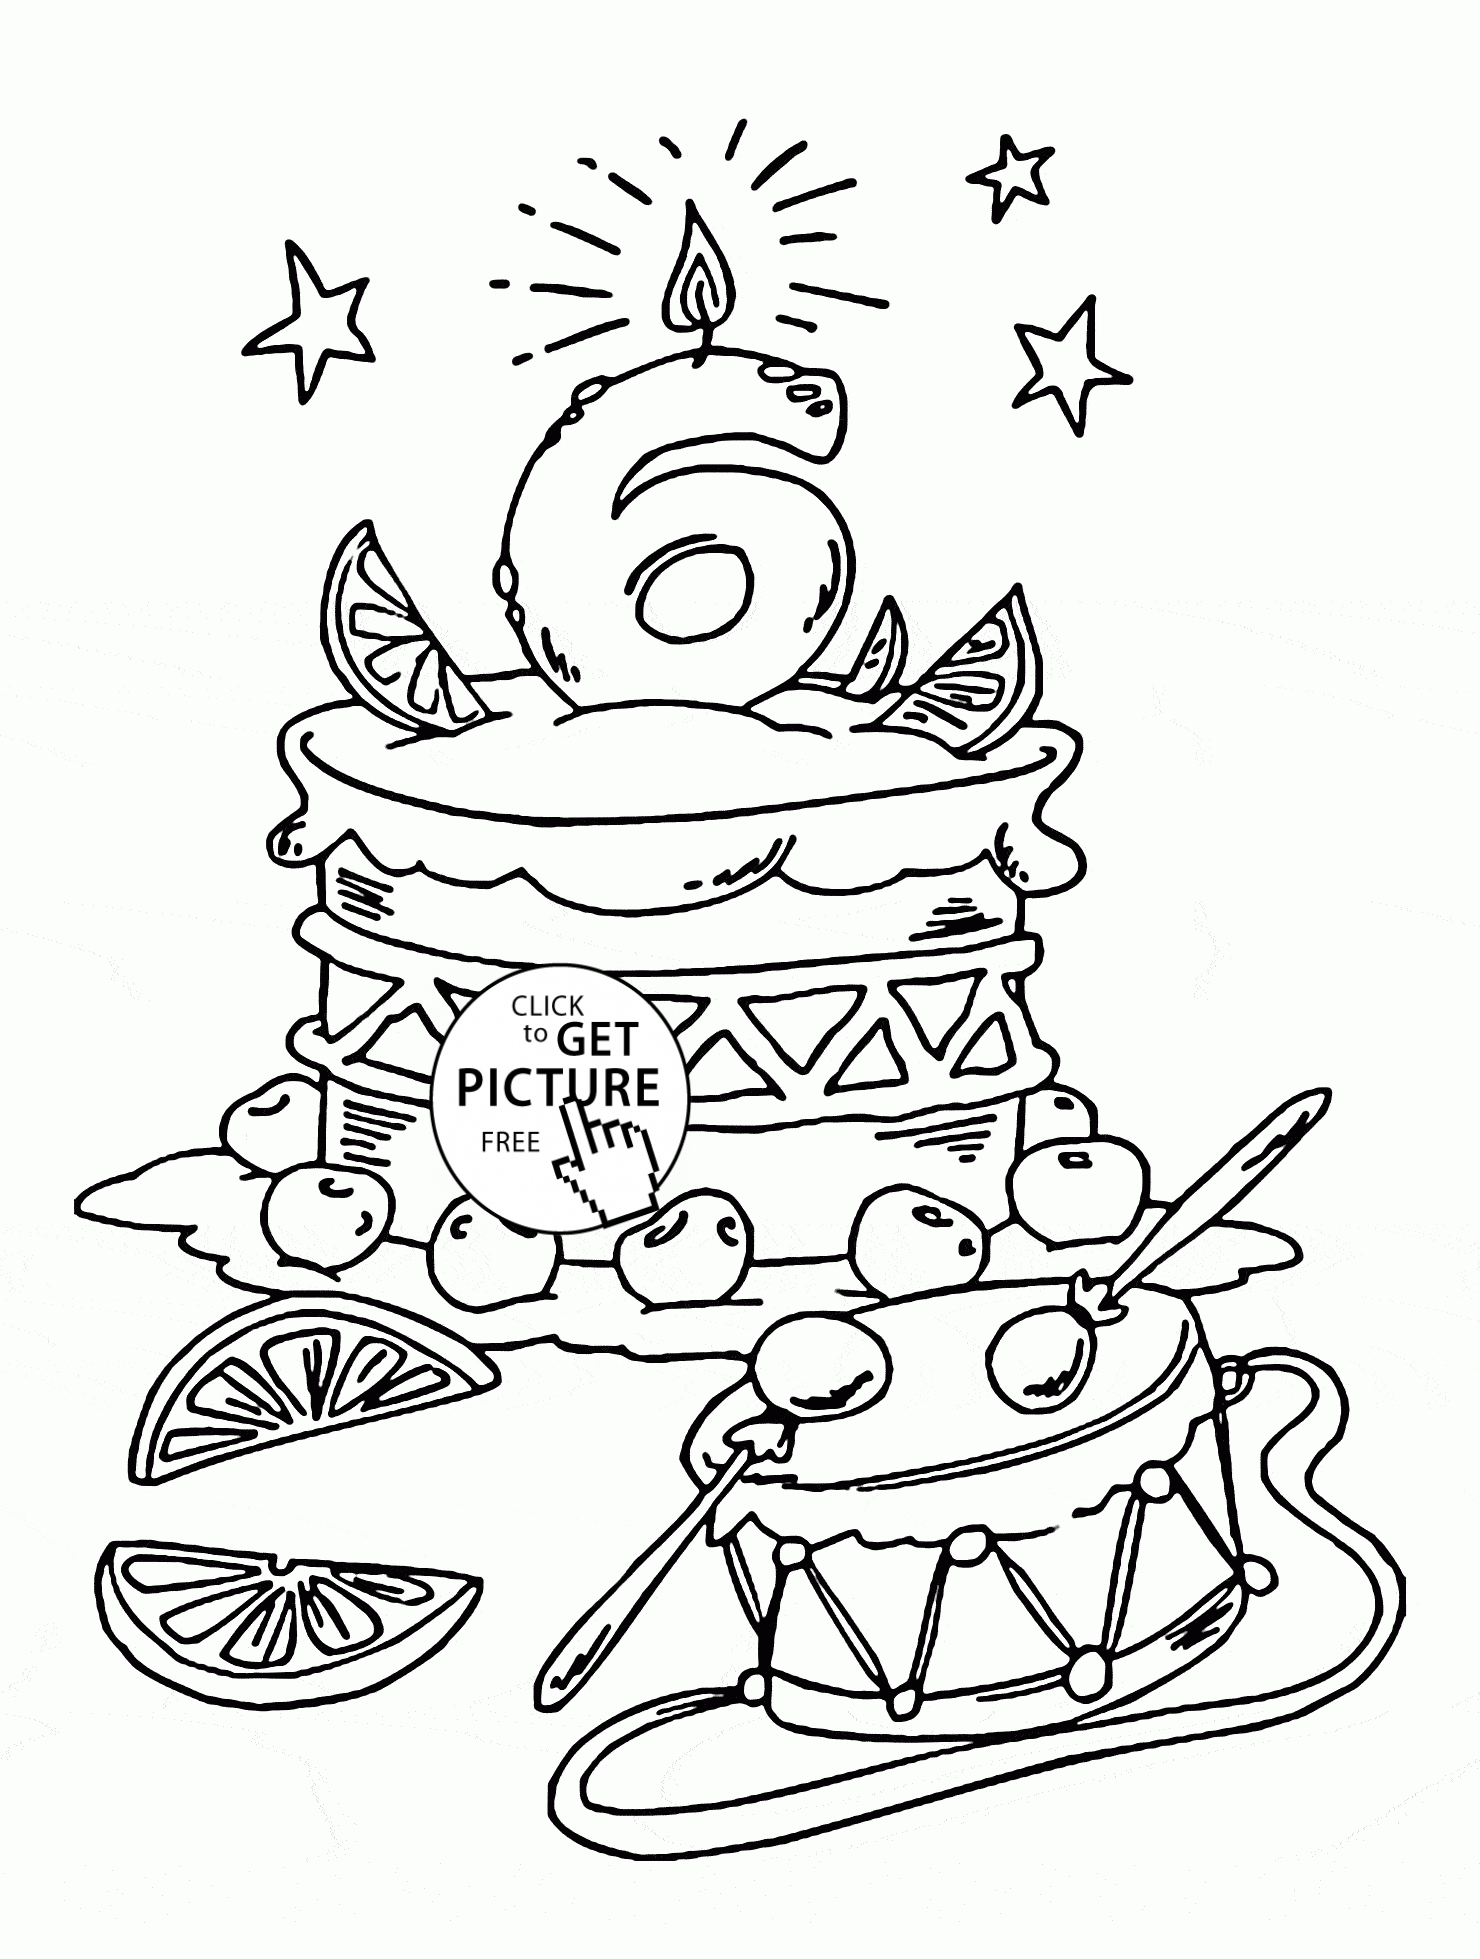 Happy Birthday Coloring Pages To Print Cooloring Book Happy Birthday Coloring Books Photo Inspirations